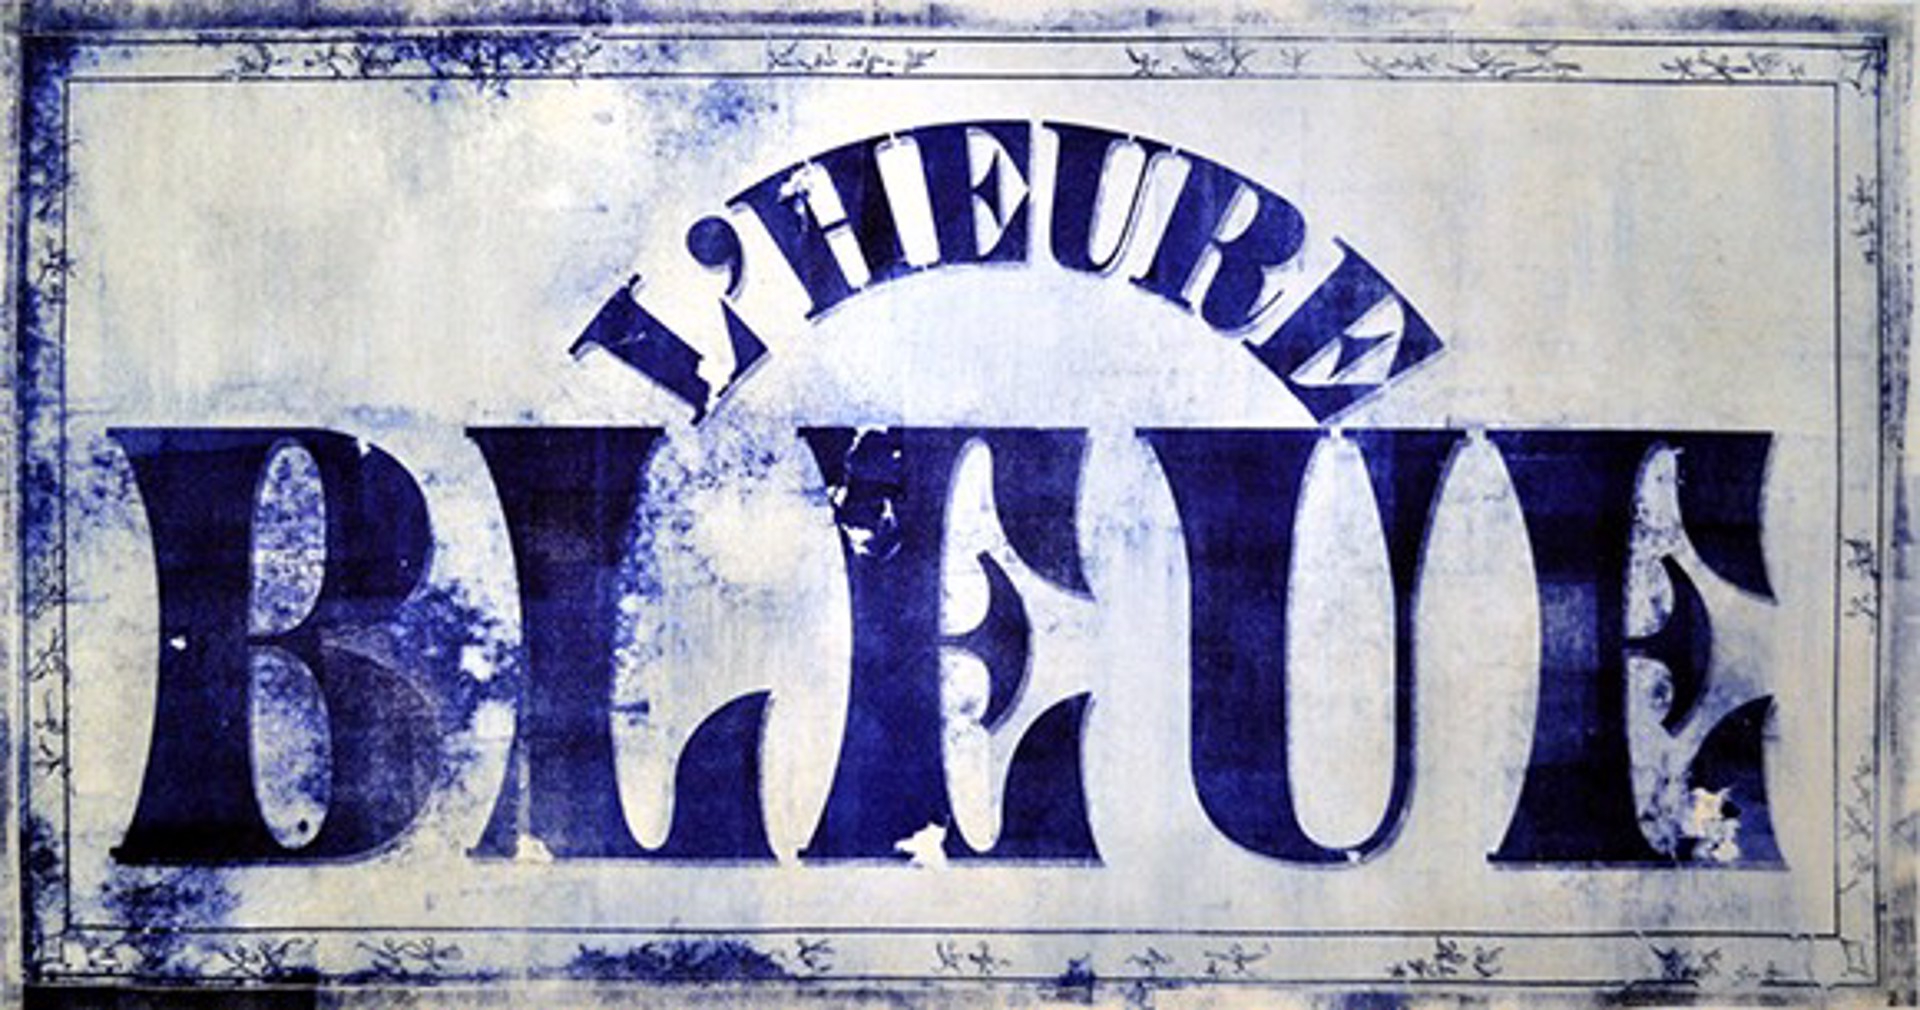 L'heure Bleue by Anne Beresford